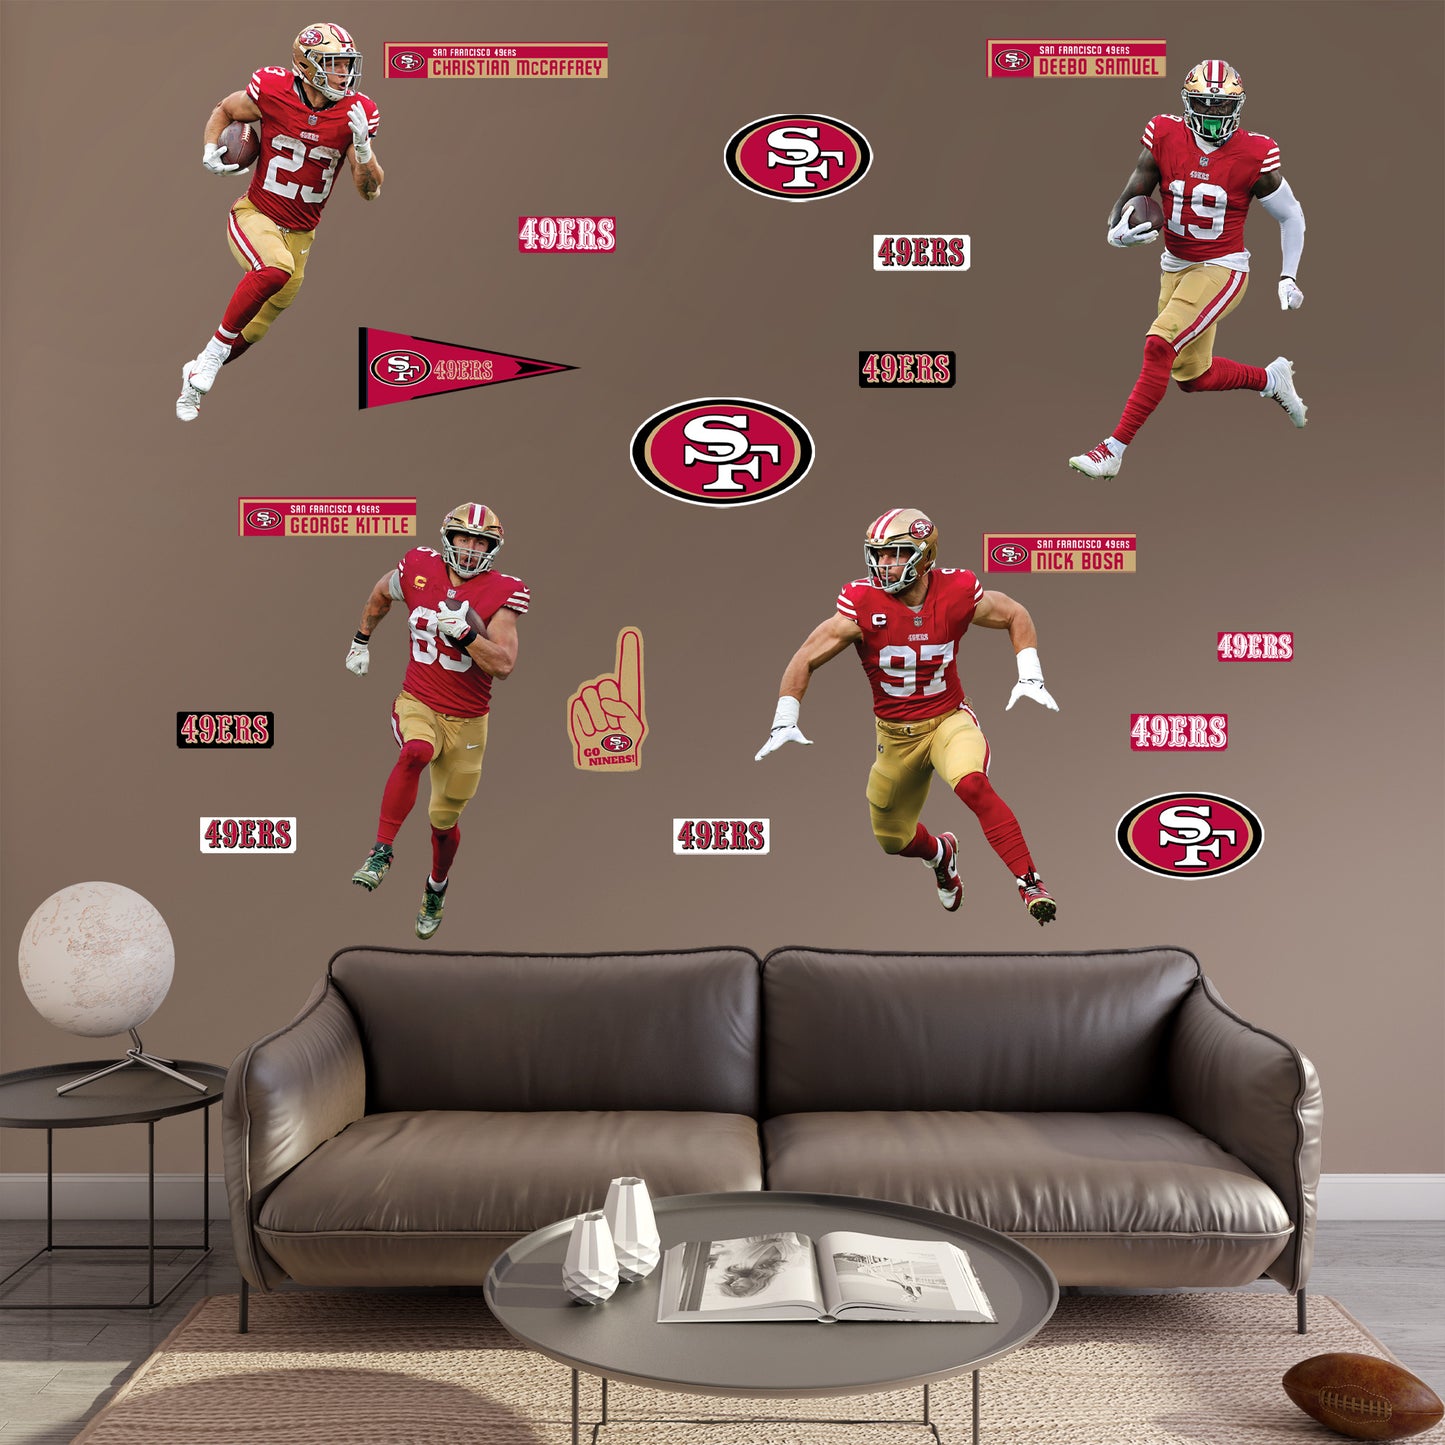 San Francisco 49ers: Christian McCaffrey, Nick Bosa, Deebo Samuel and George Kittle Team Collection        - Officially Licensed NFL Removable     Adhesive Decal